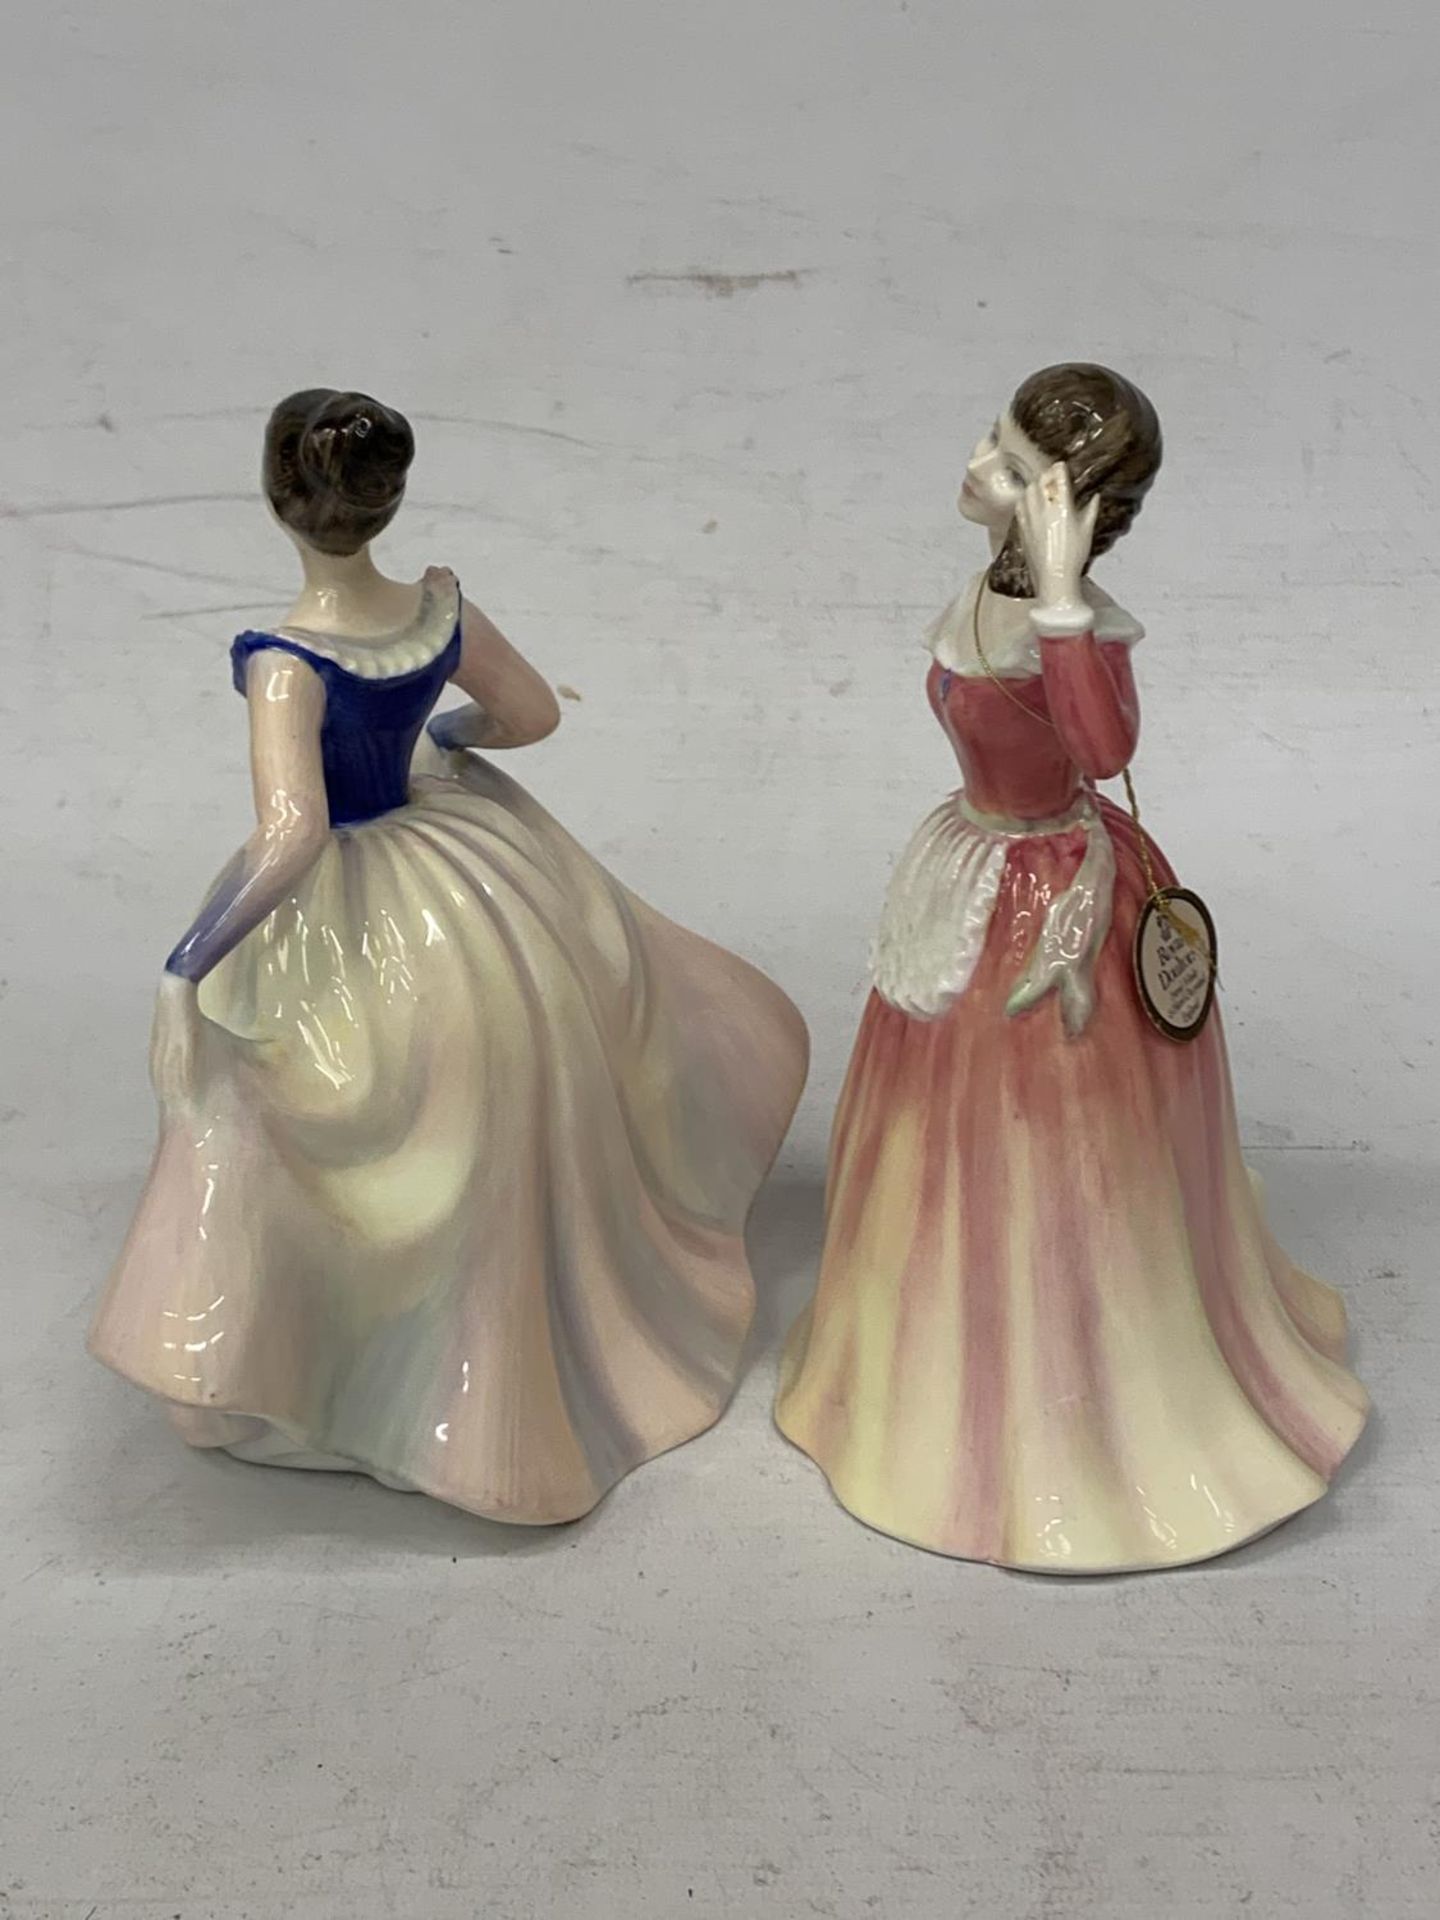 TWO ROYAL DOULTON FIGURES "LISA" HN 2394 AND "PATRICIA" HN 3907 - Image 3 of 4